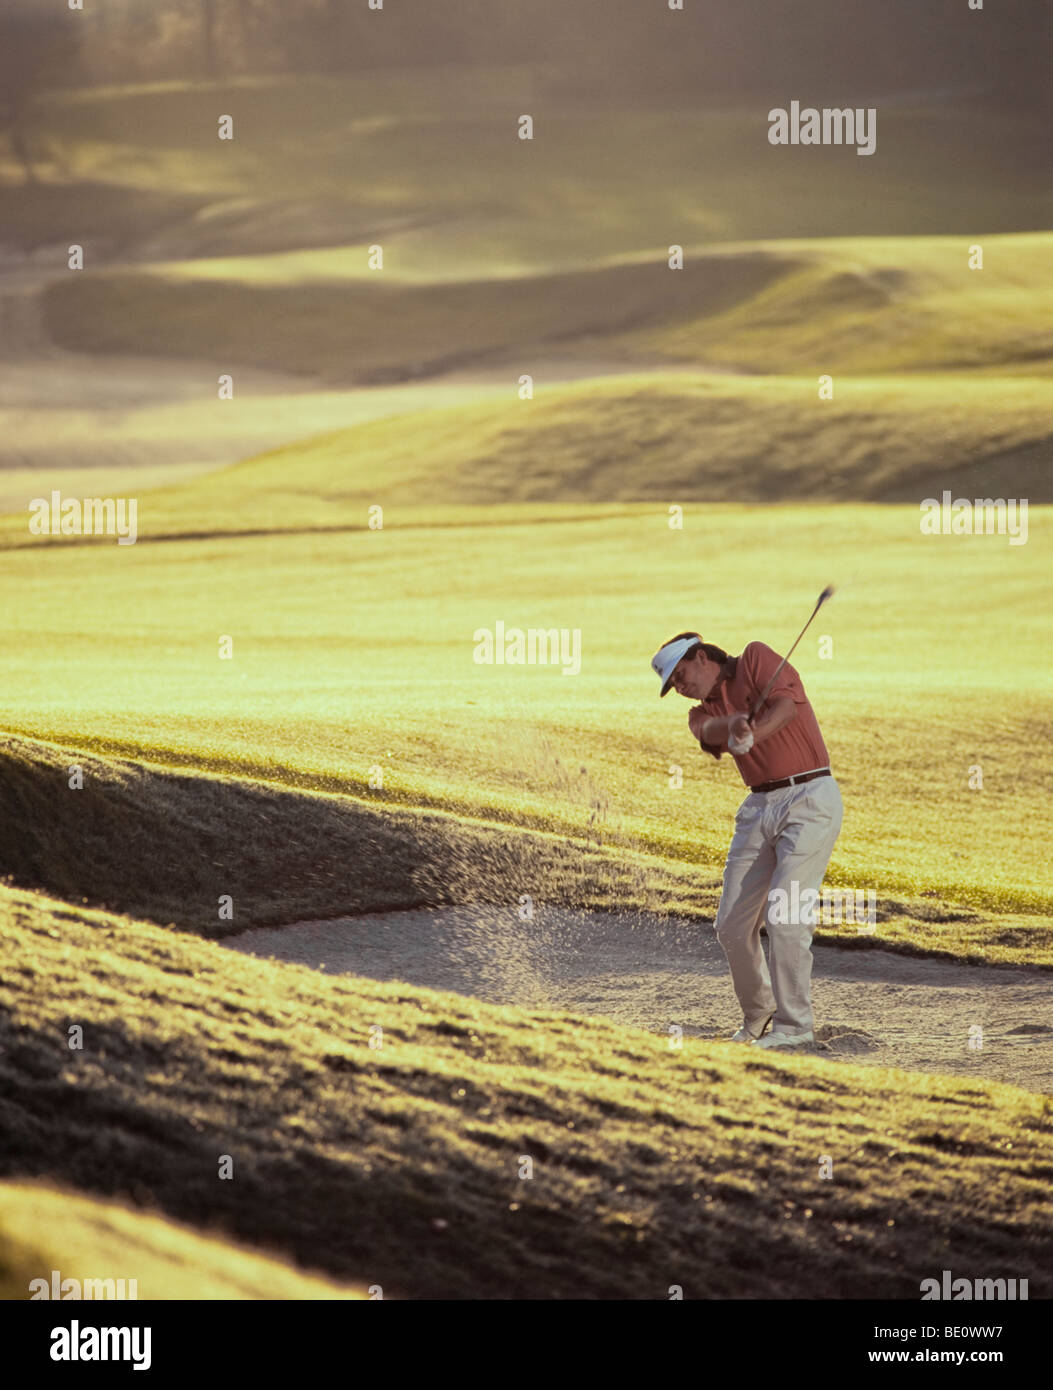 Man golfer chipping from sand trap Stock Photo